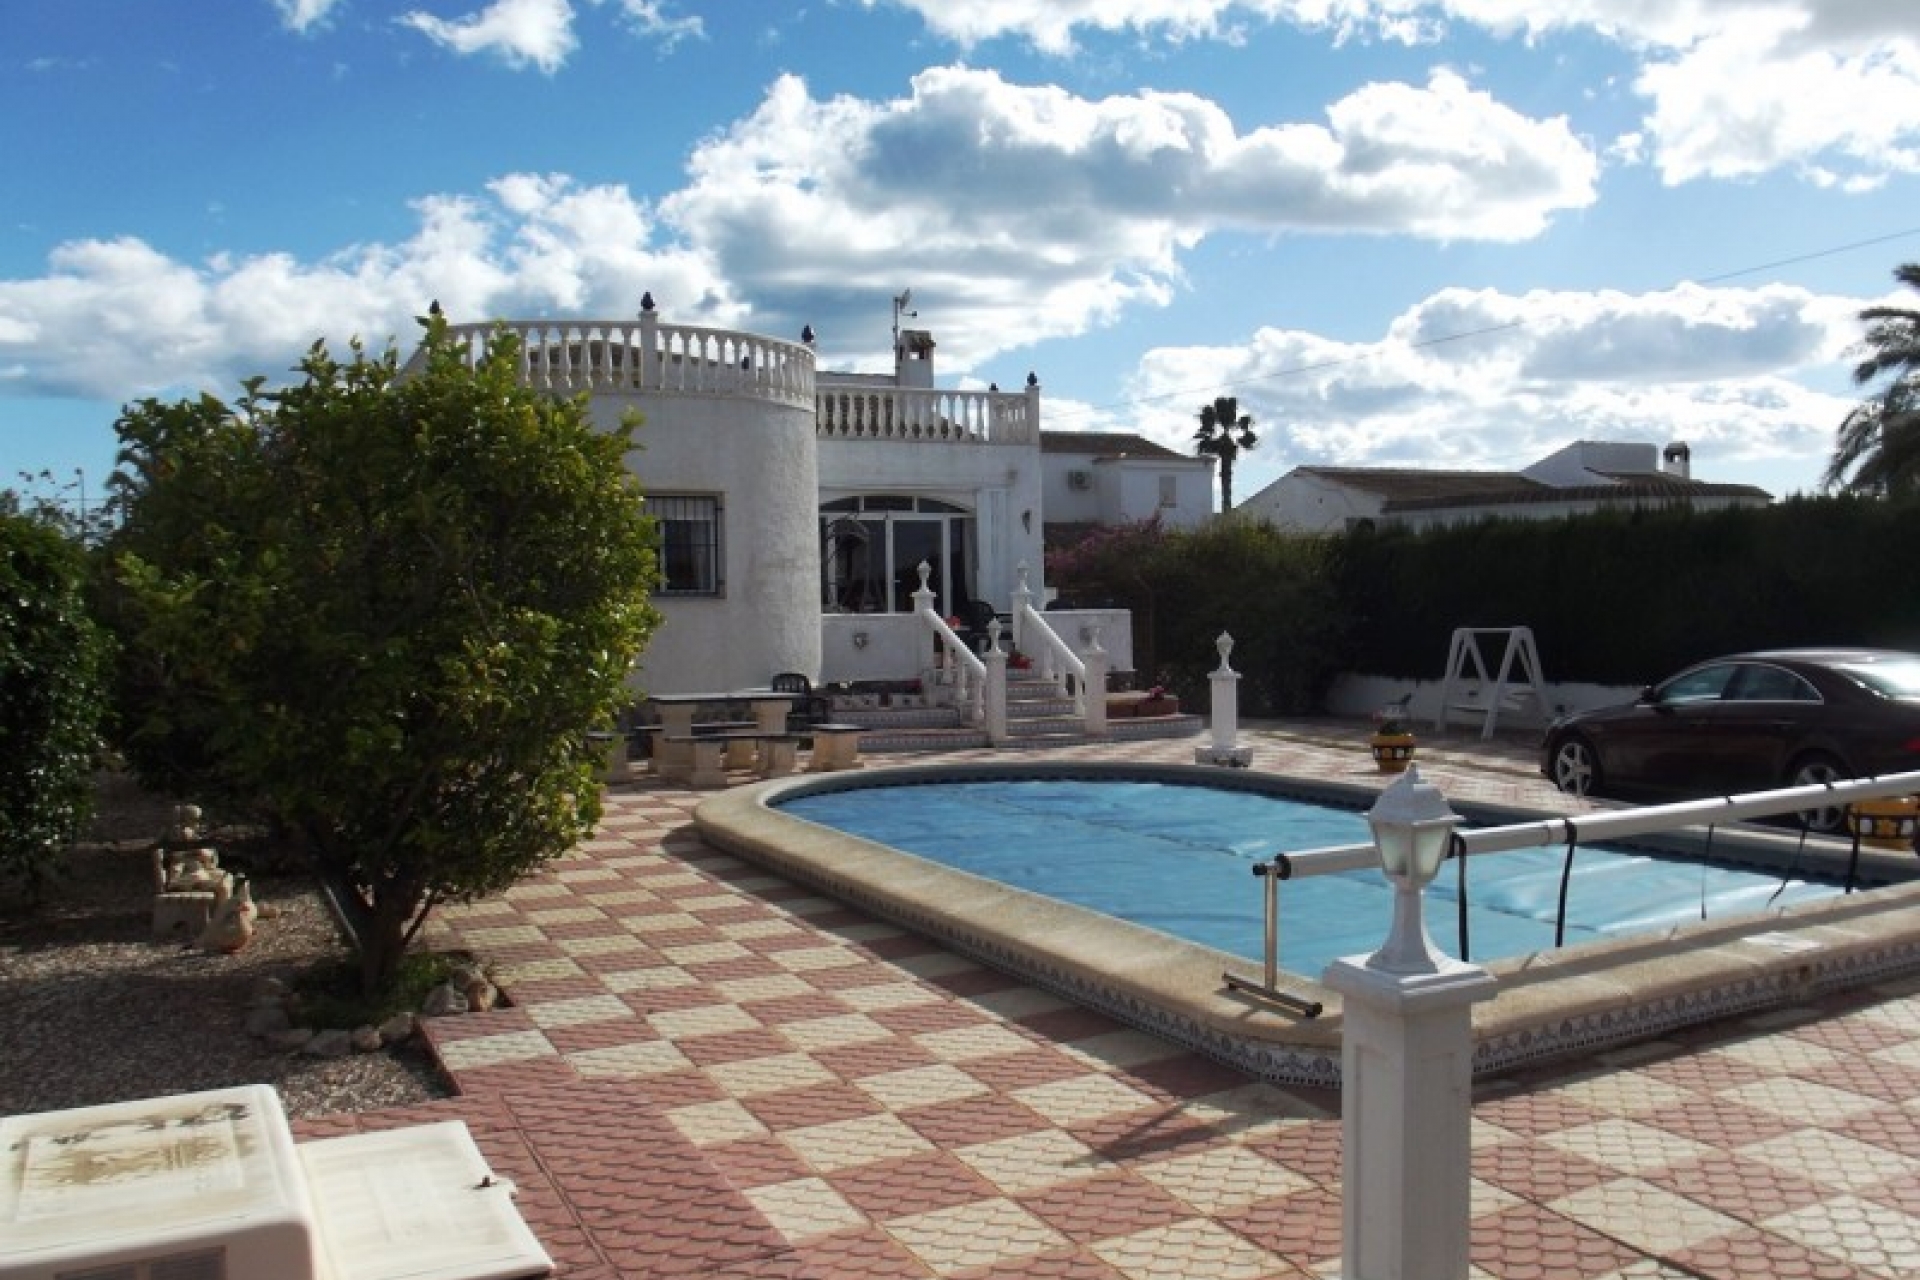 Close to Torrevieja and La Siesta, Costa Blanca, Spain, cheap Villa bargain for sale,  property for sale in San Luis.